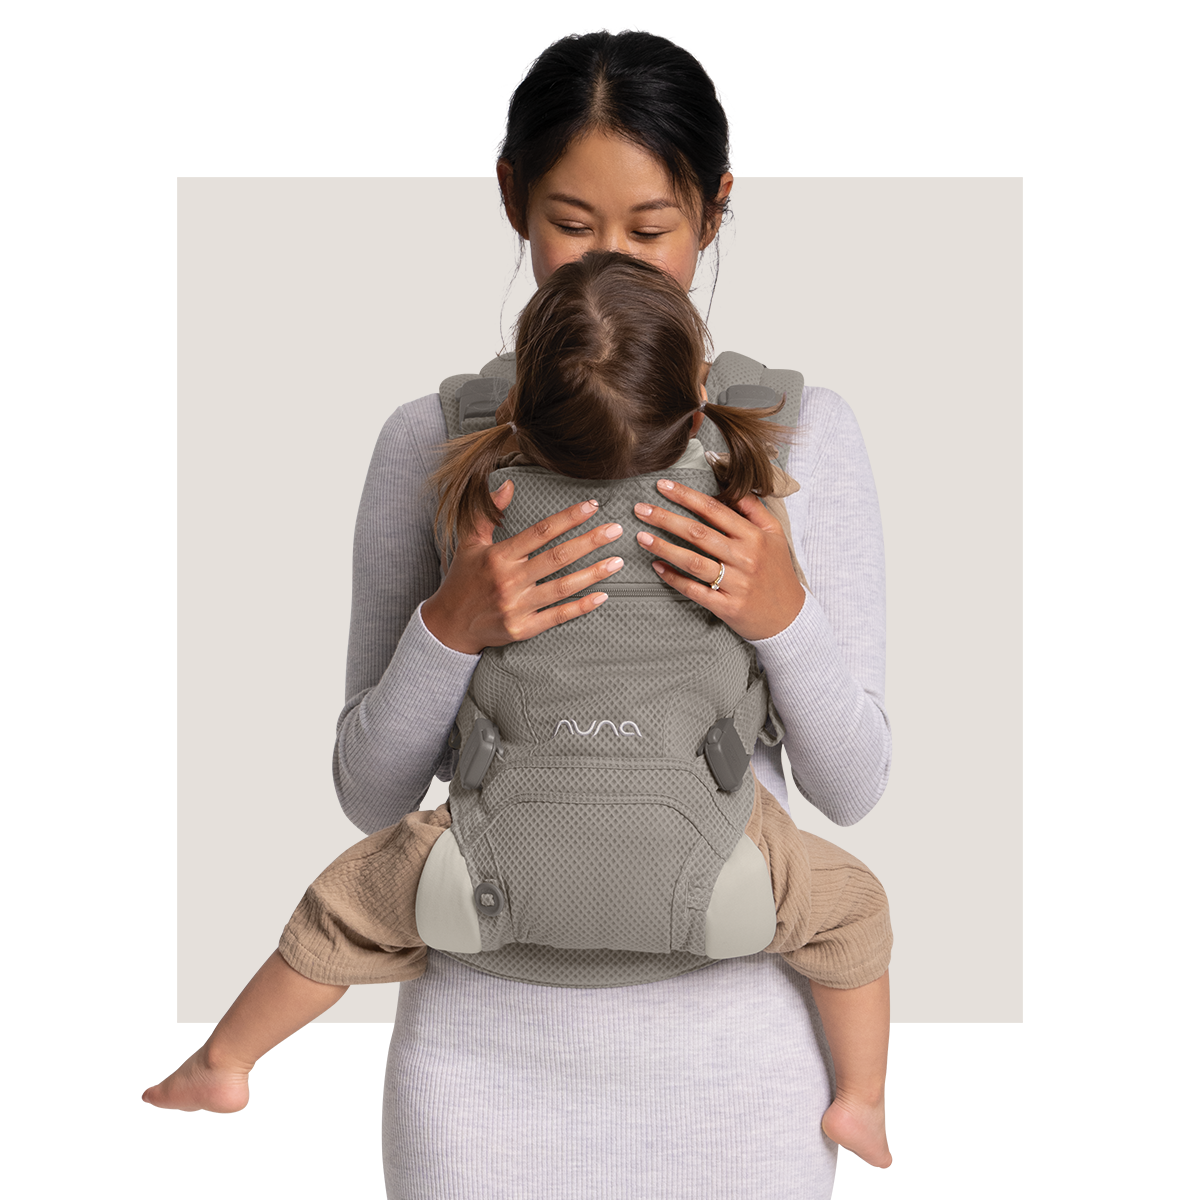 Mother smiles at toddler in CUDL clik baby carrier